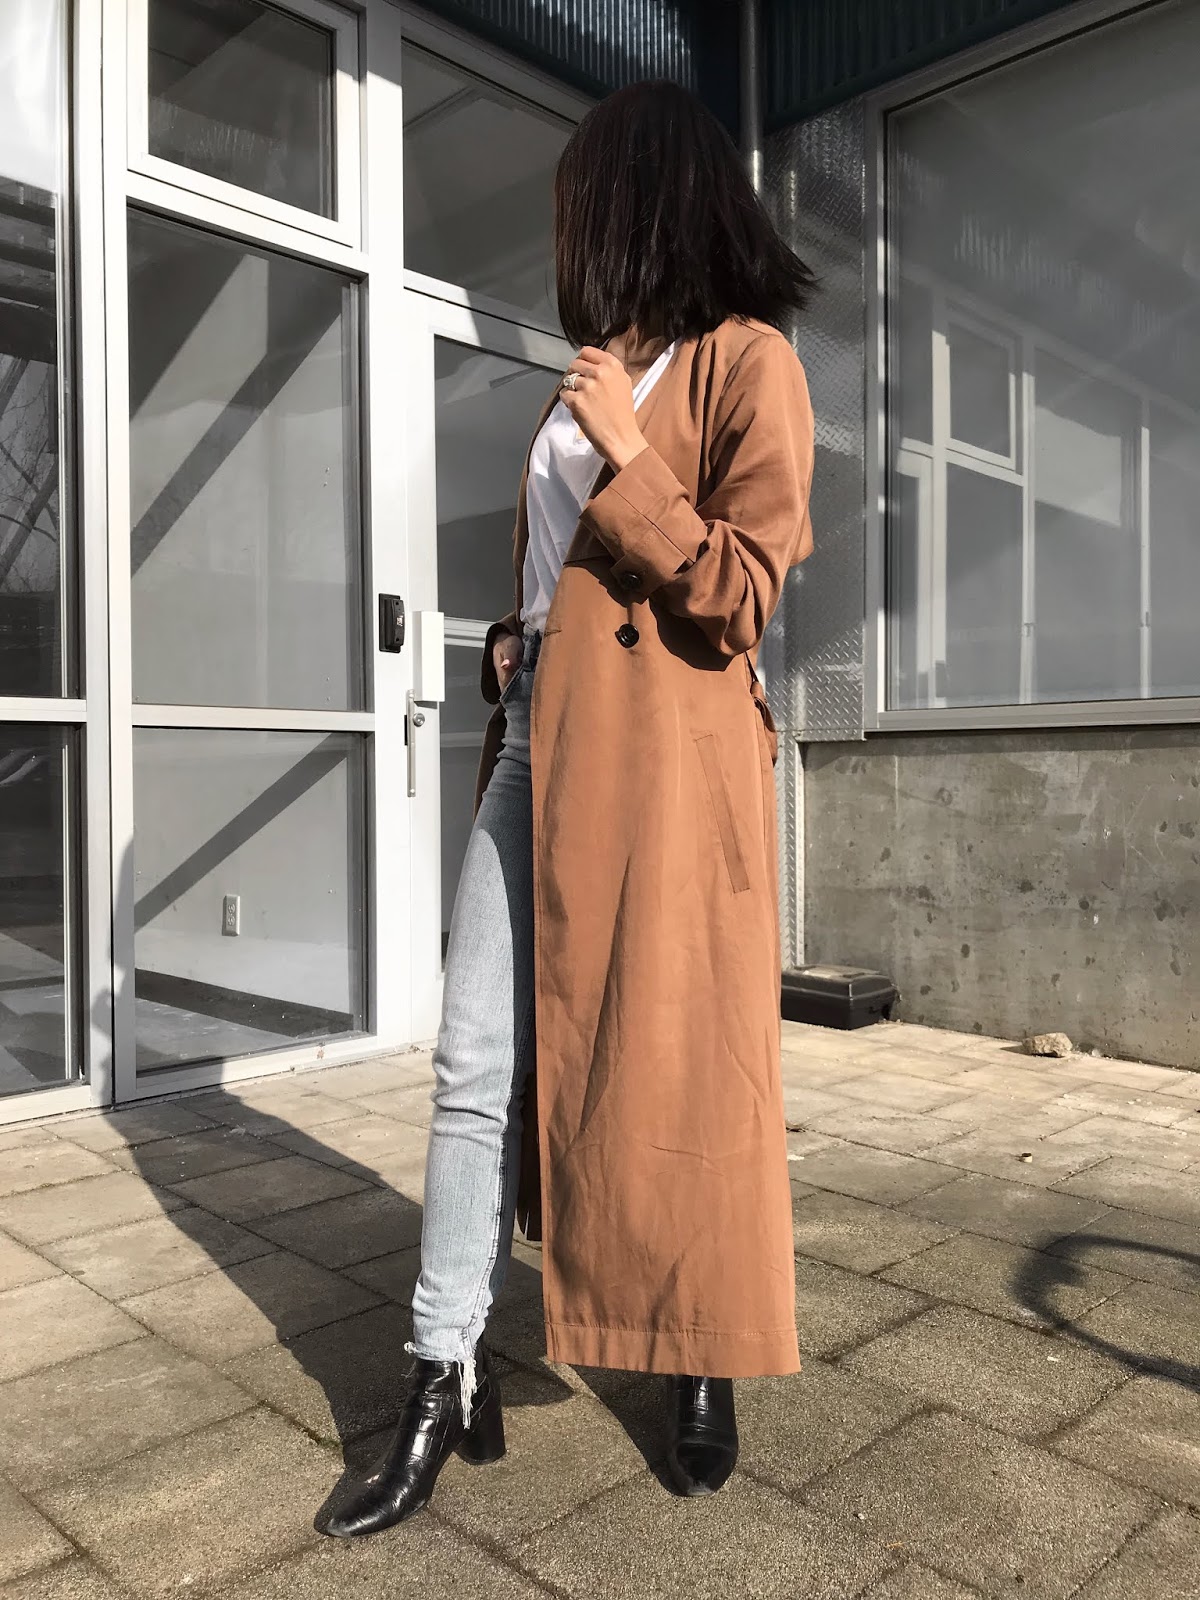 Spring Classics: The Trench Coat